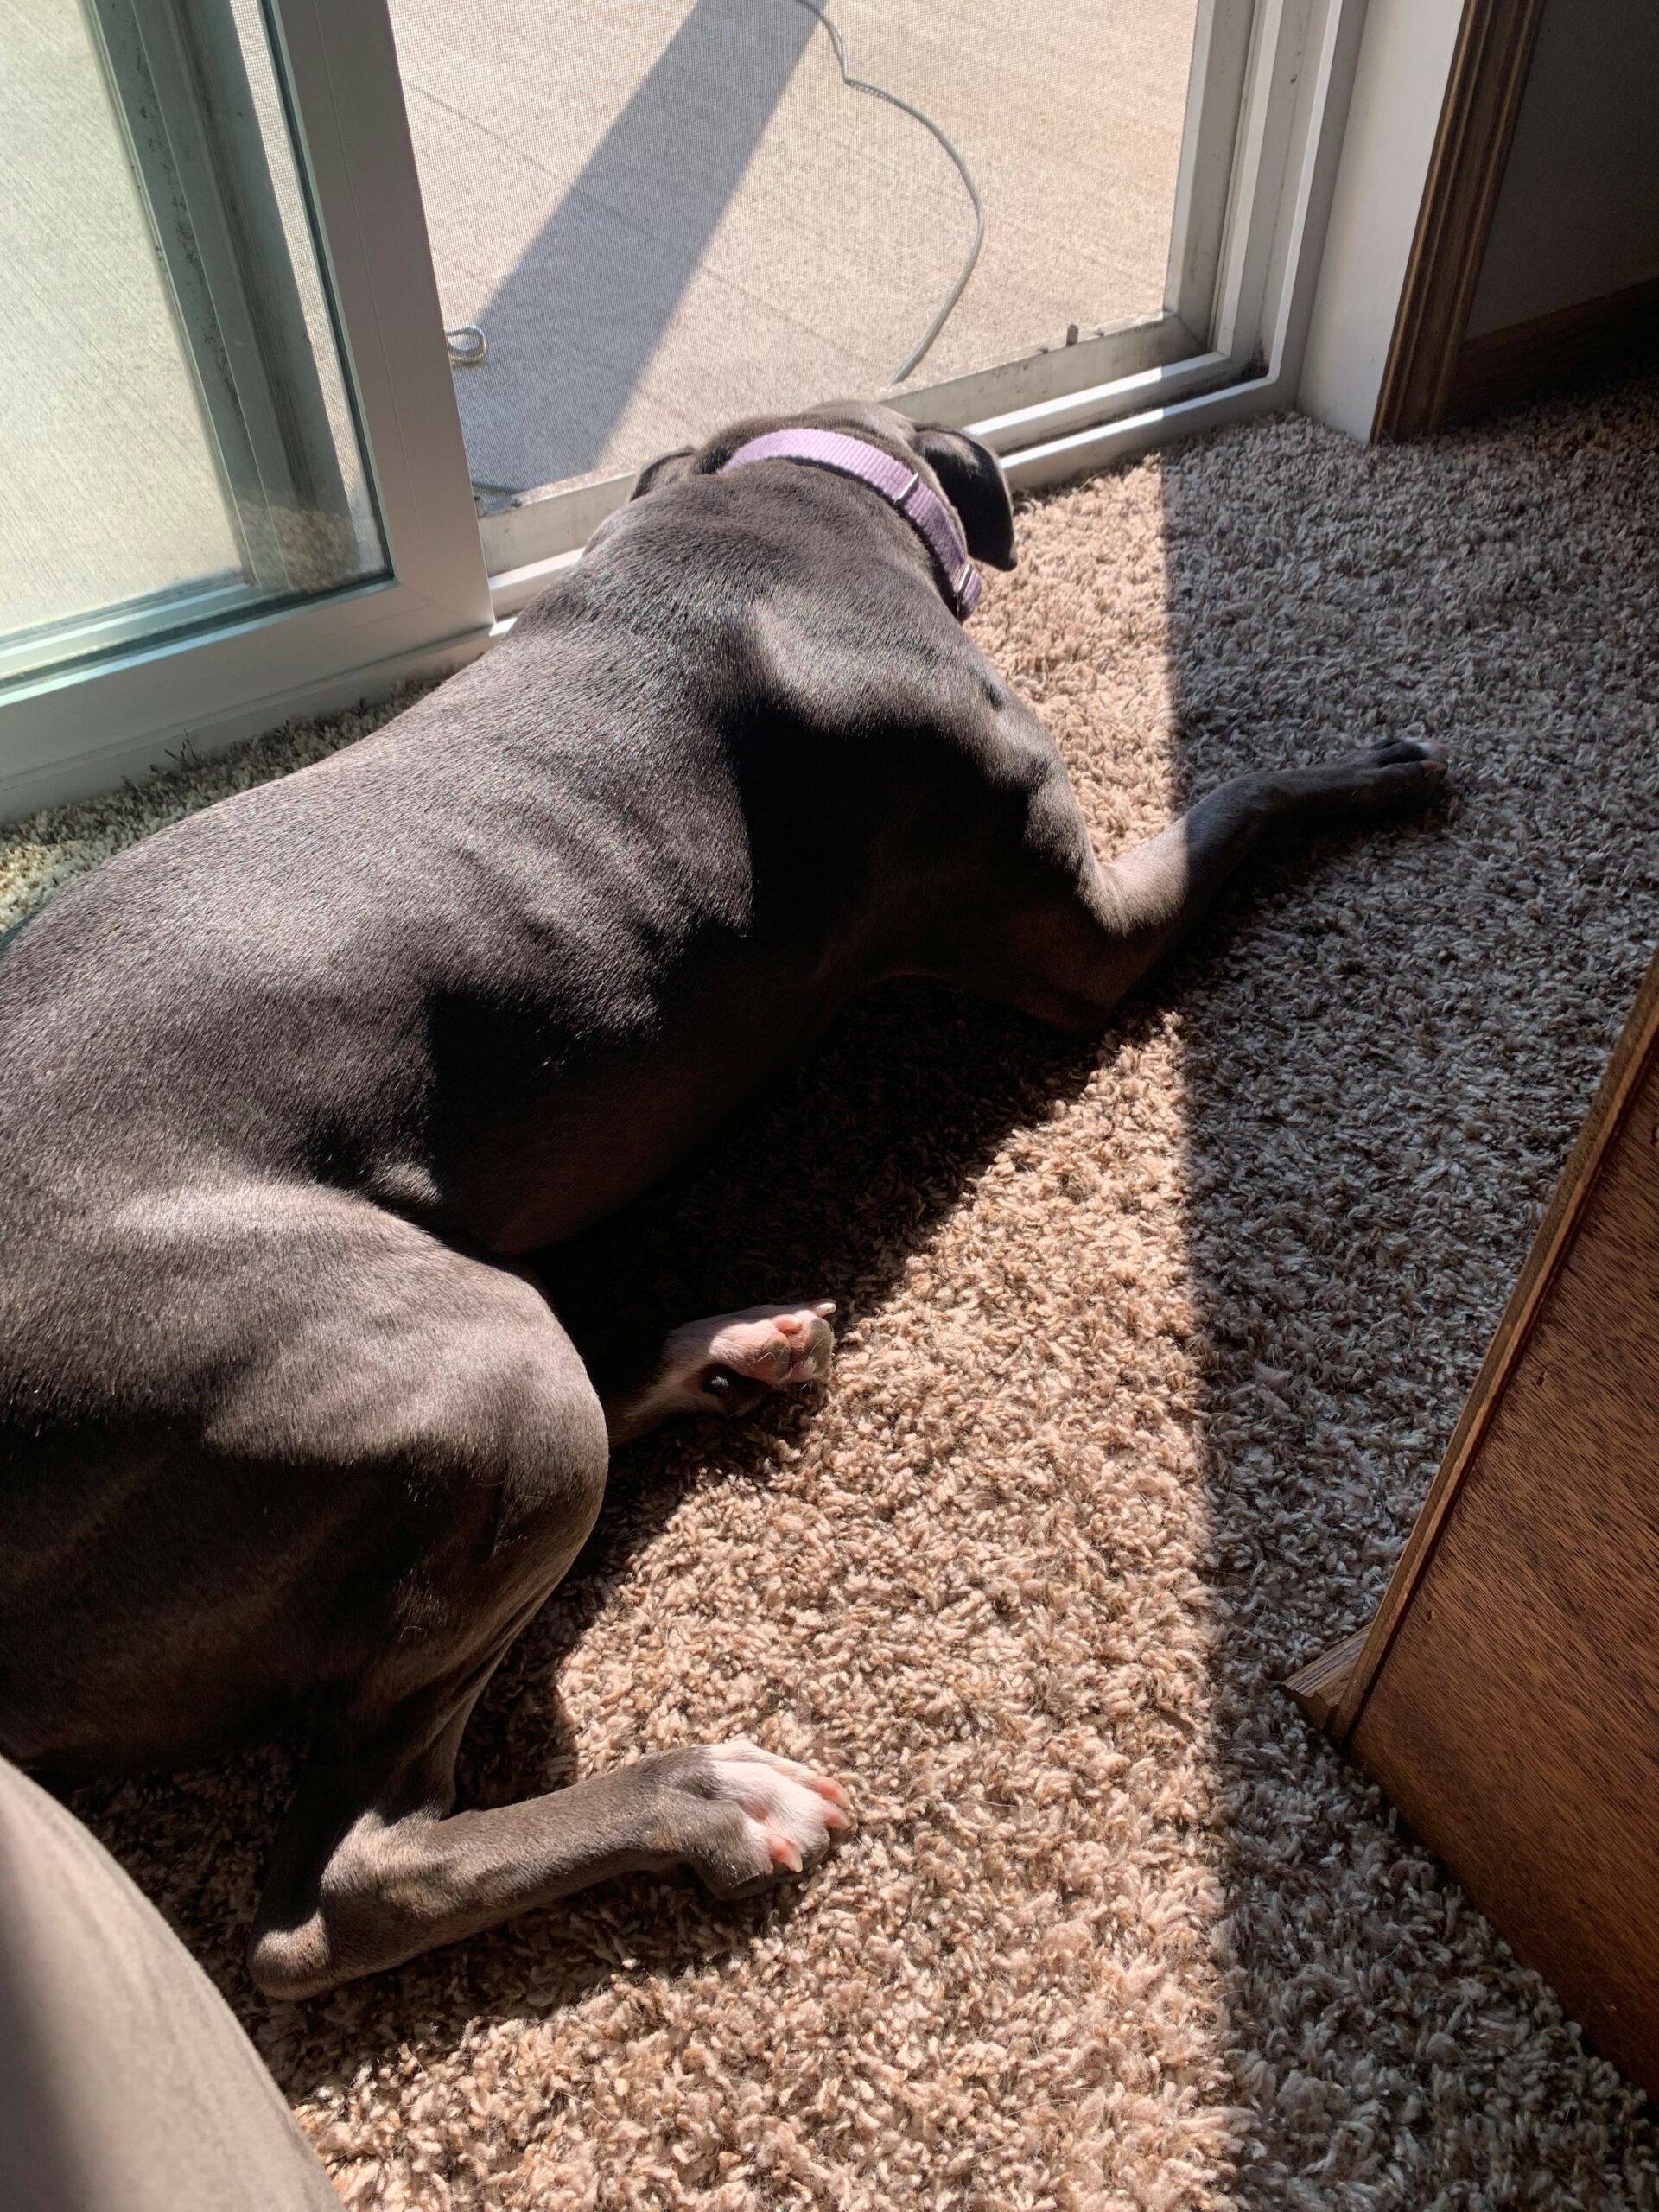 A big brown dog lays in the sunlight coming through a glass door